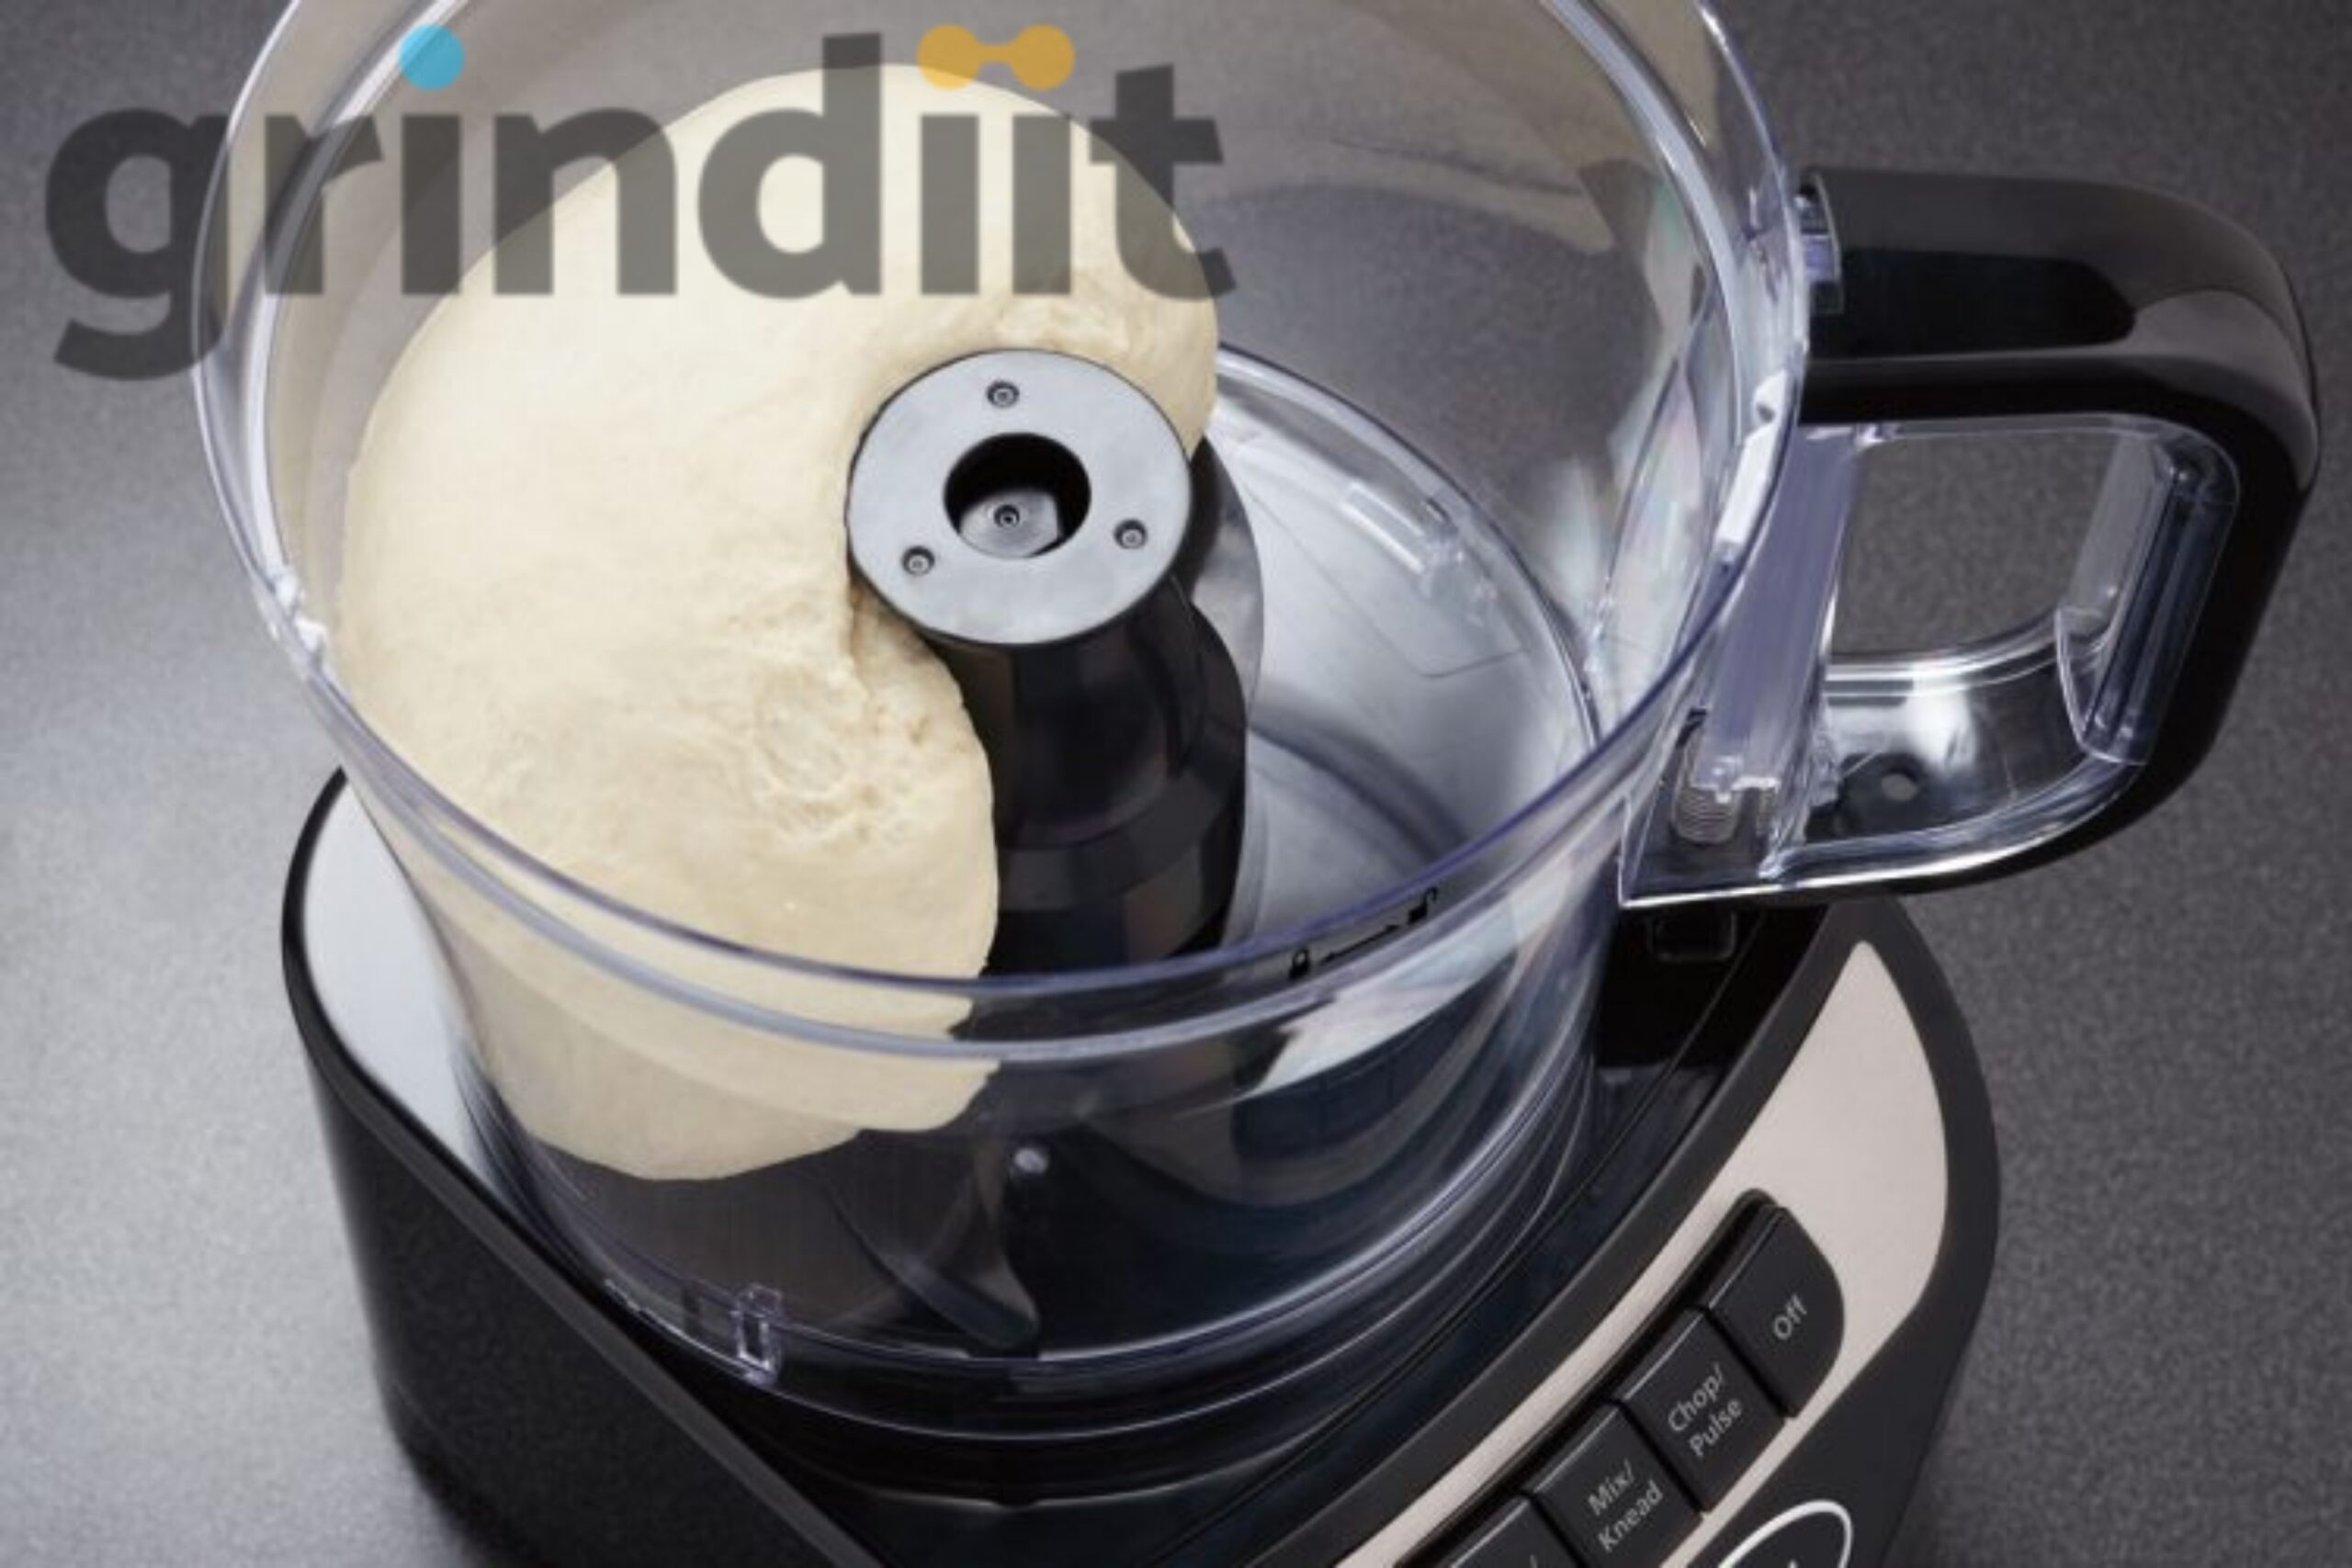 Food processor vs stand mixer for dough, What size food processor for bread dough, Best food processor 2020, How to make dough in Cuisinart food processor, KitchenAid Food Processor dough blade, Best food processor for dough India, Pizza dough food processor vs stand mixer, Breville food processor dough blade,